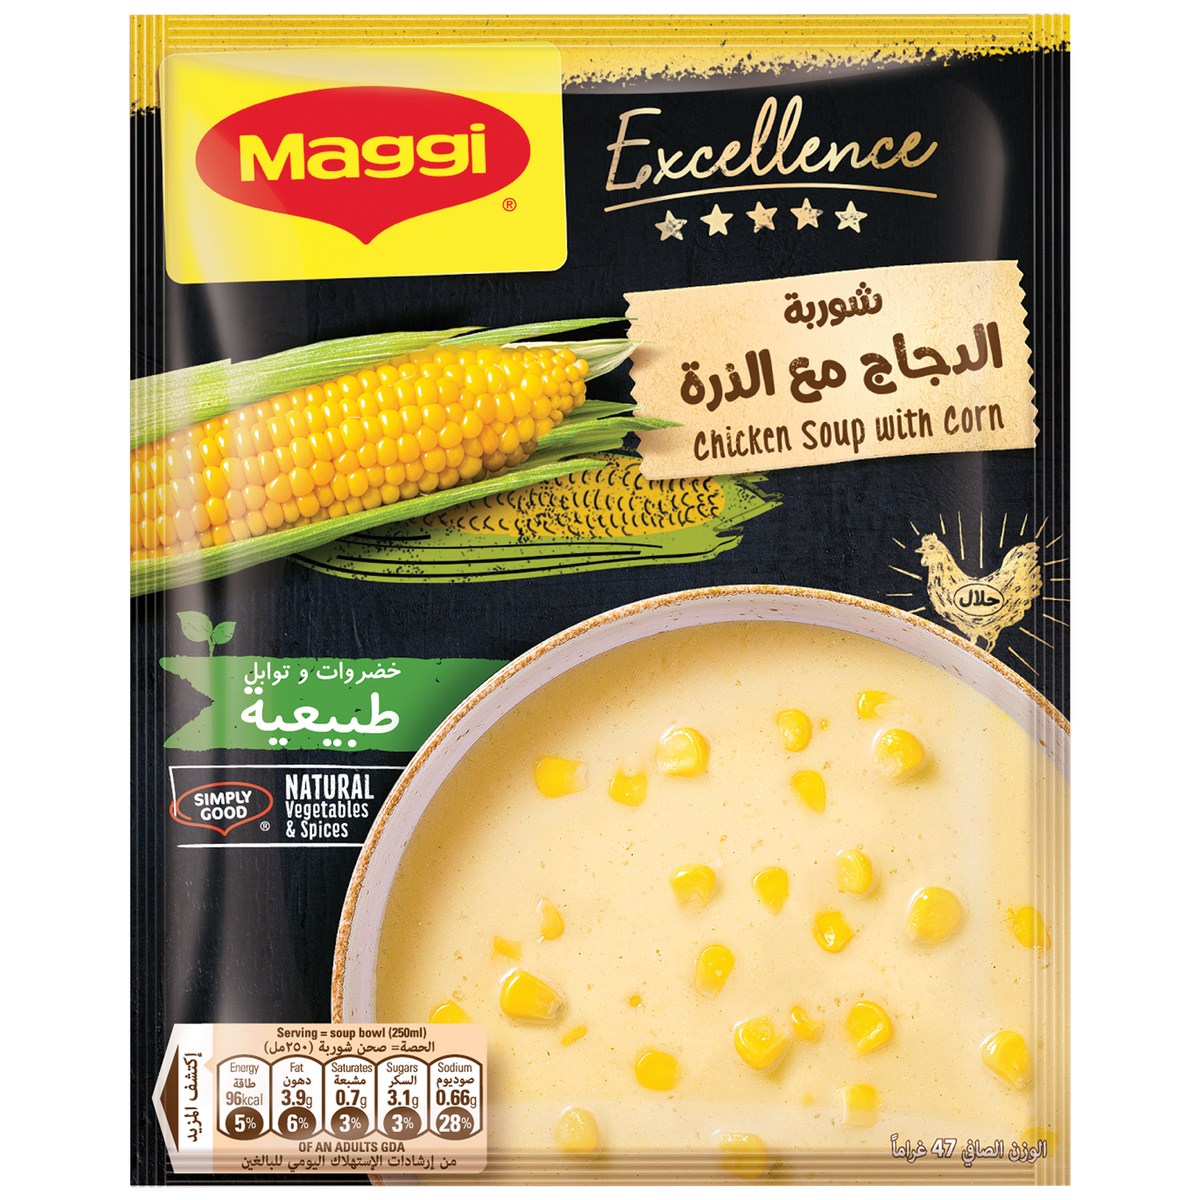 Maggi Excellence Chicken Soup With Corn 47g